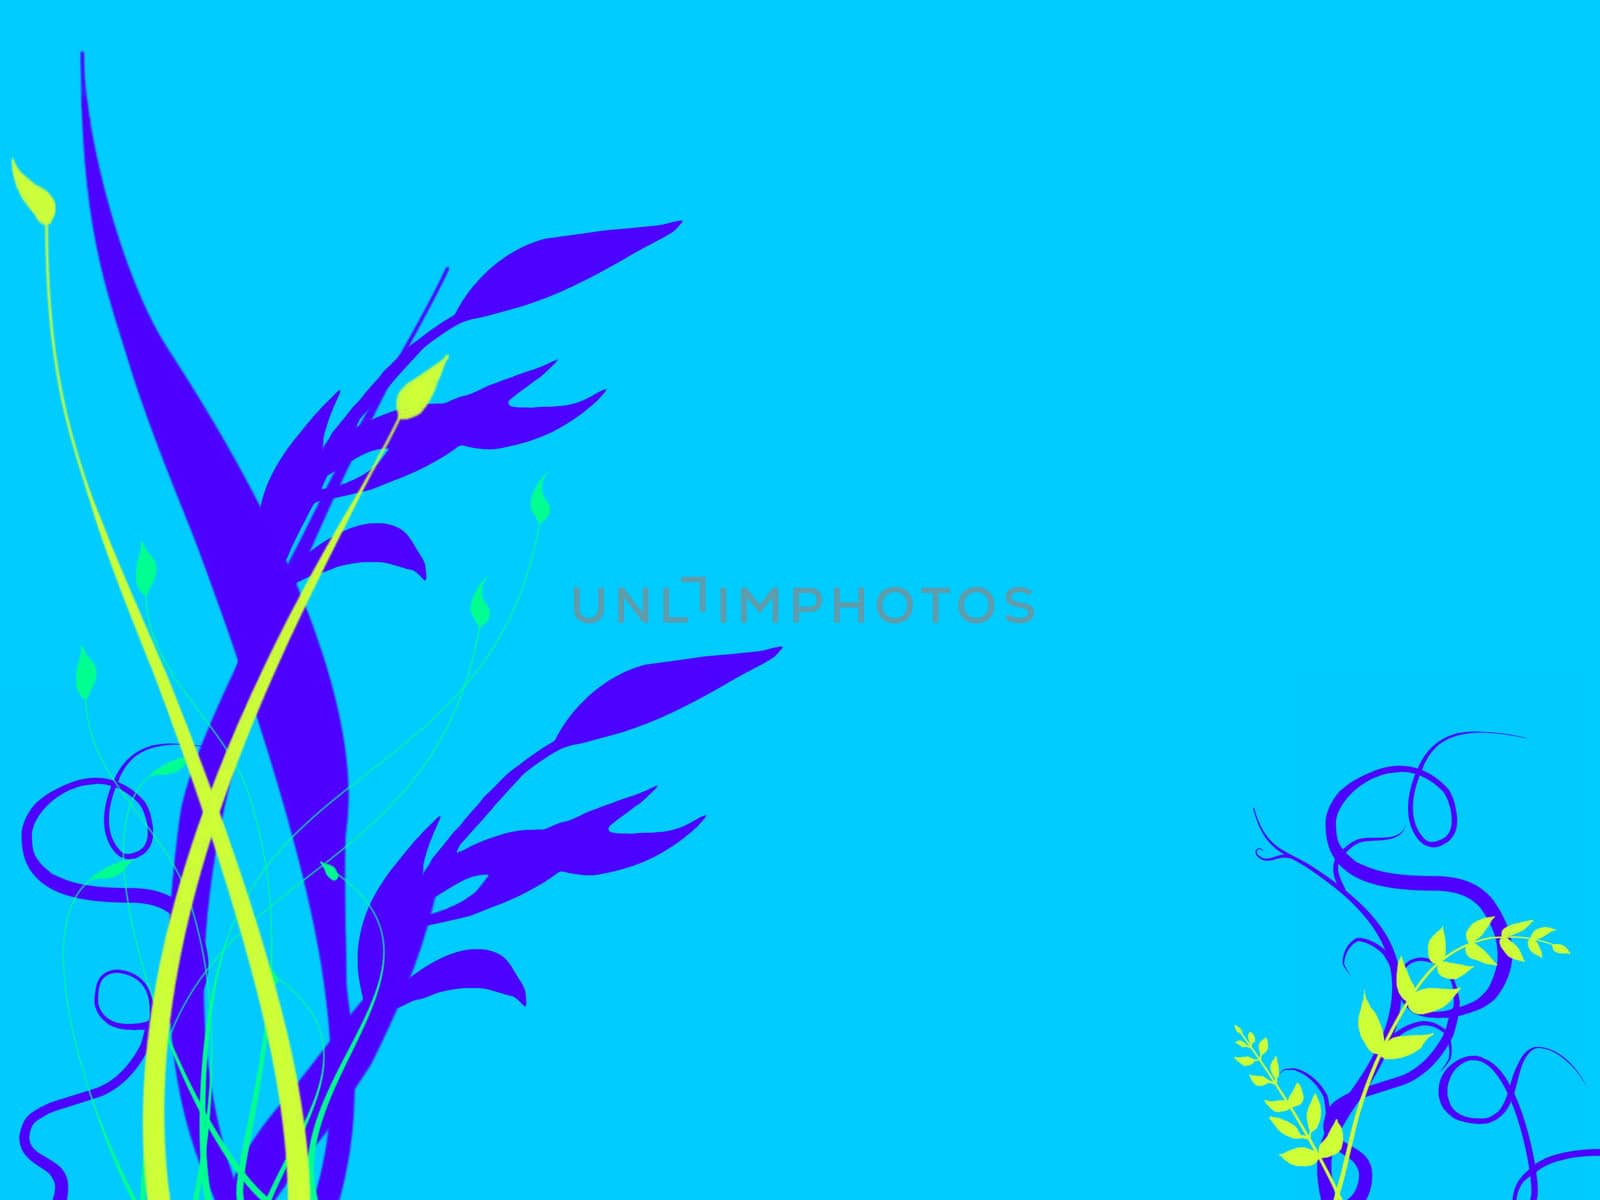 Underwater Foliage Growing On Sea Ocean Bed with  a light Blue Tone and Green and Purple Flowers Plants Grass Illustration Design